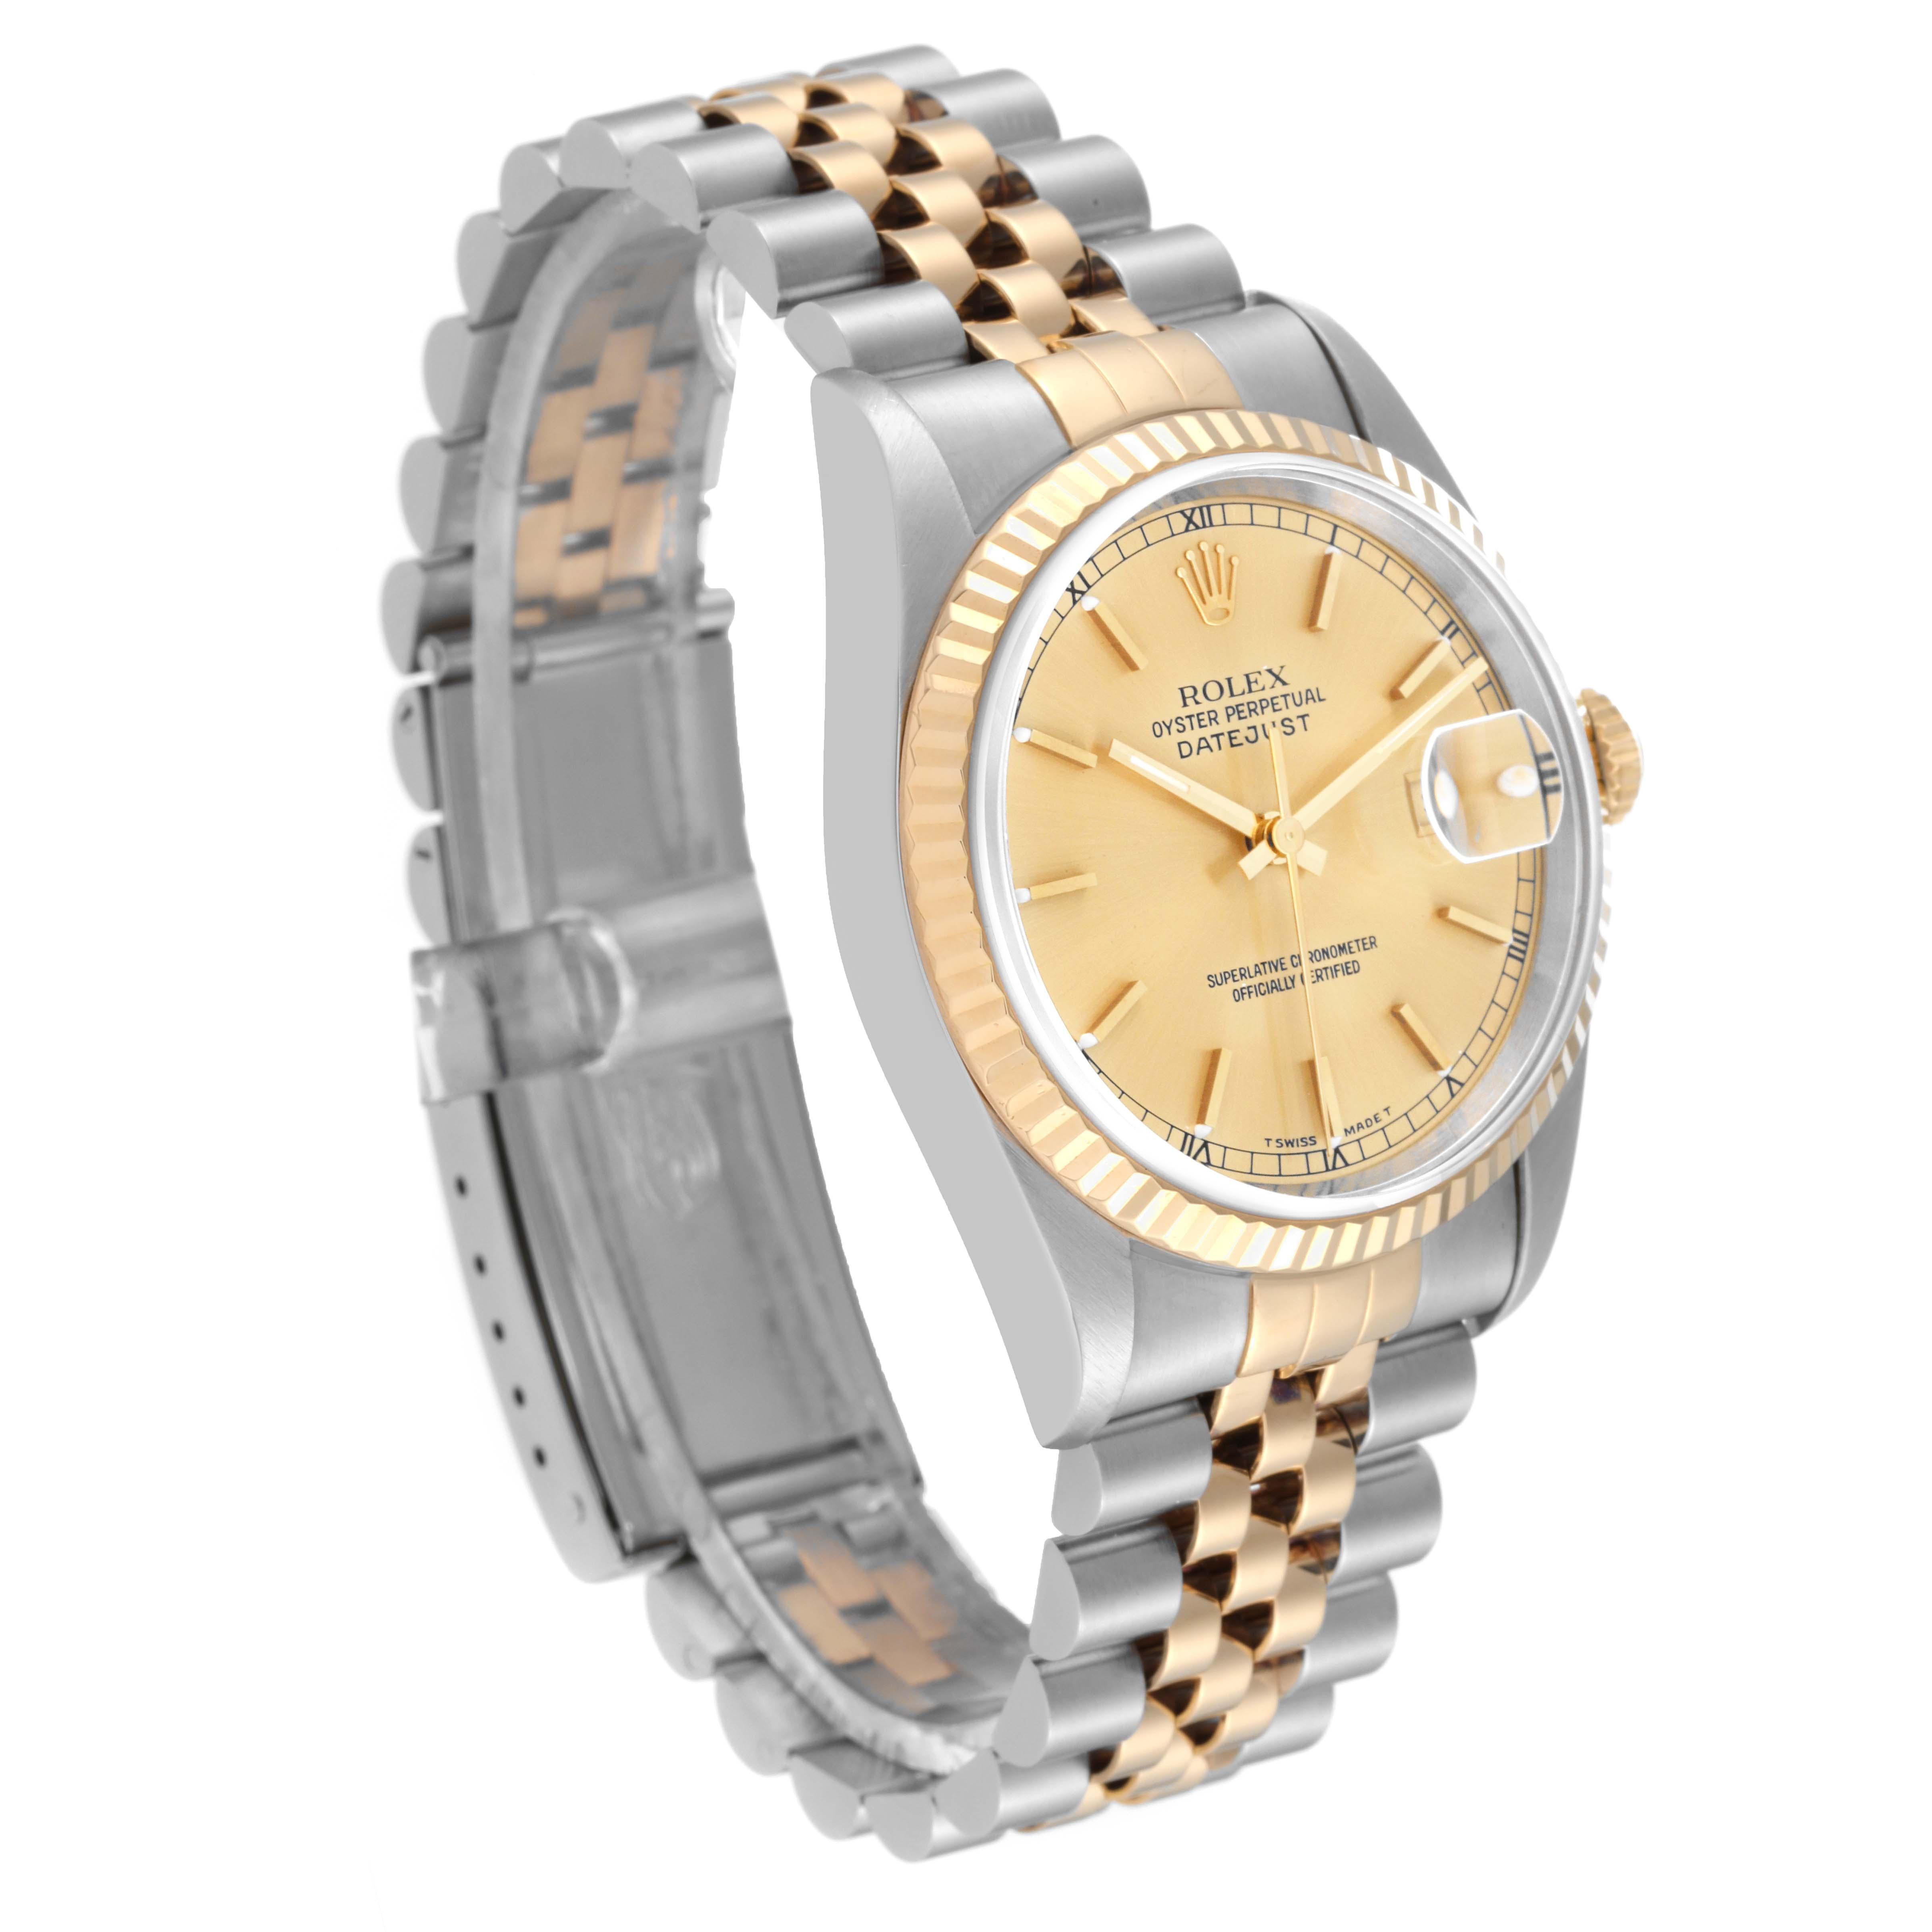 Rolex Datejust 36 Steel Yellow Gold Champagne Dial Mens Watch 16233 Box Papers For Sale 8